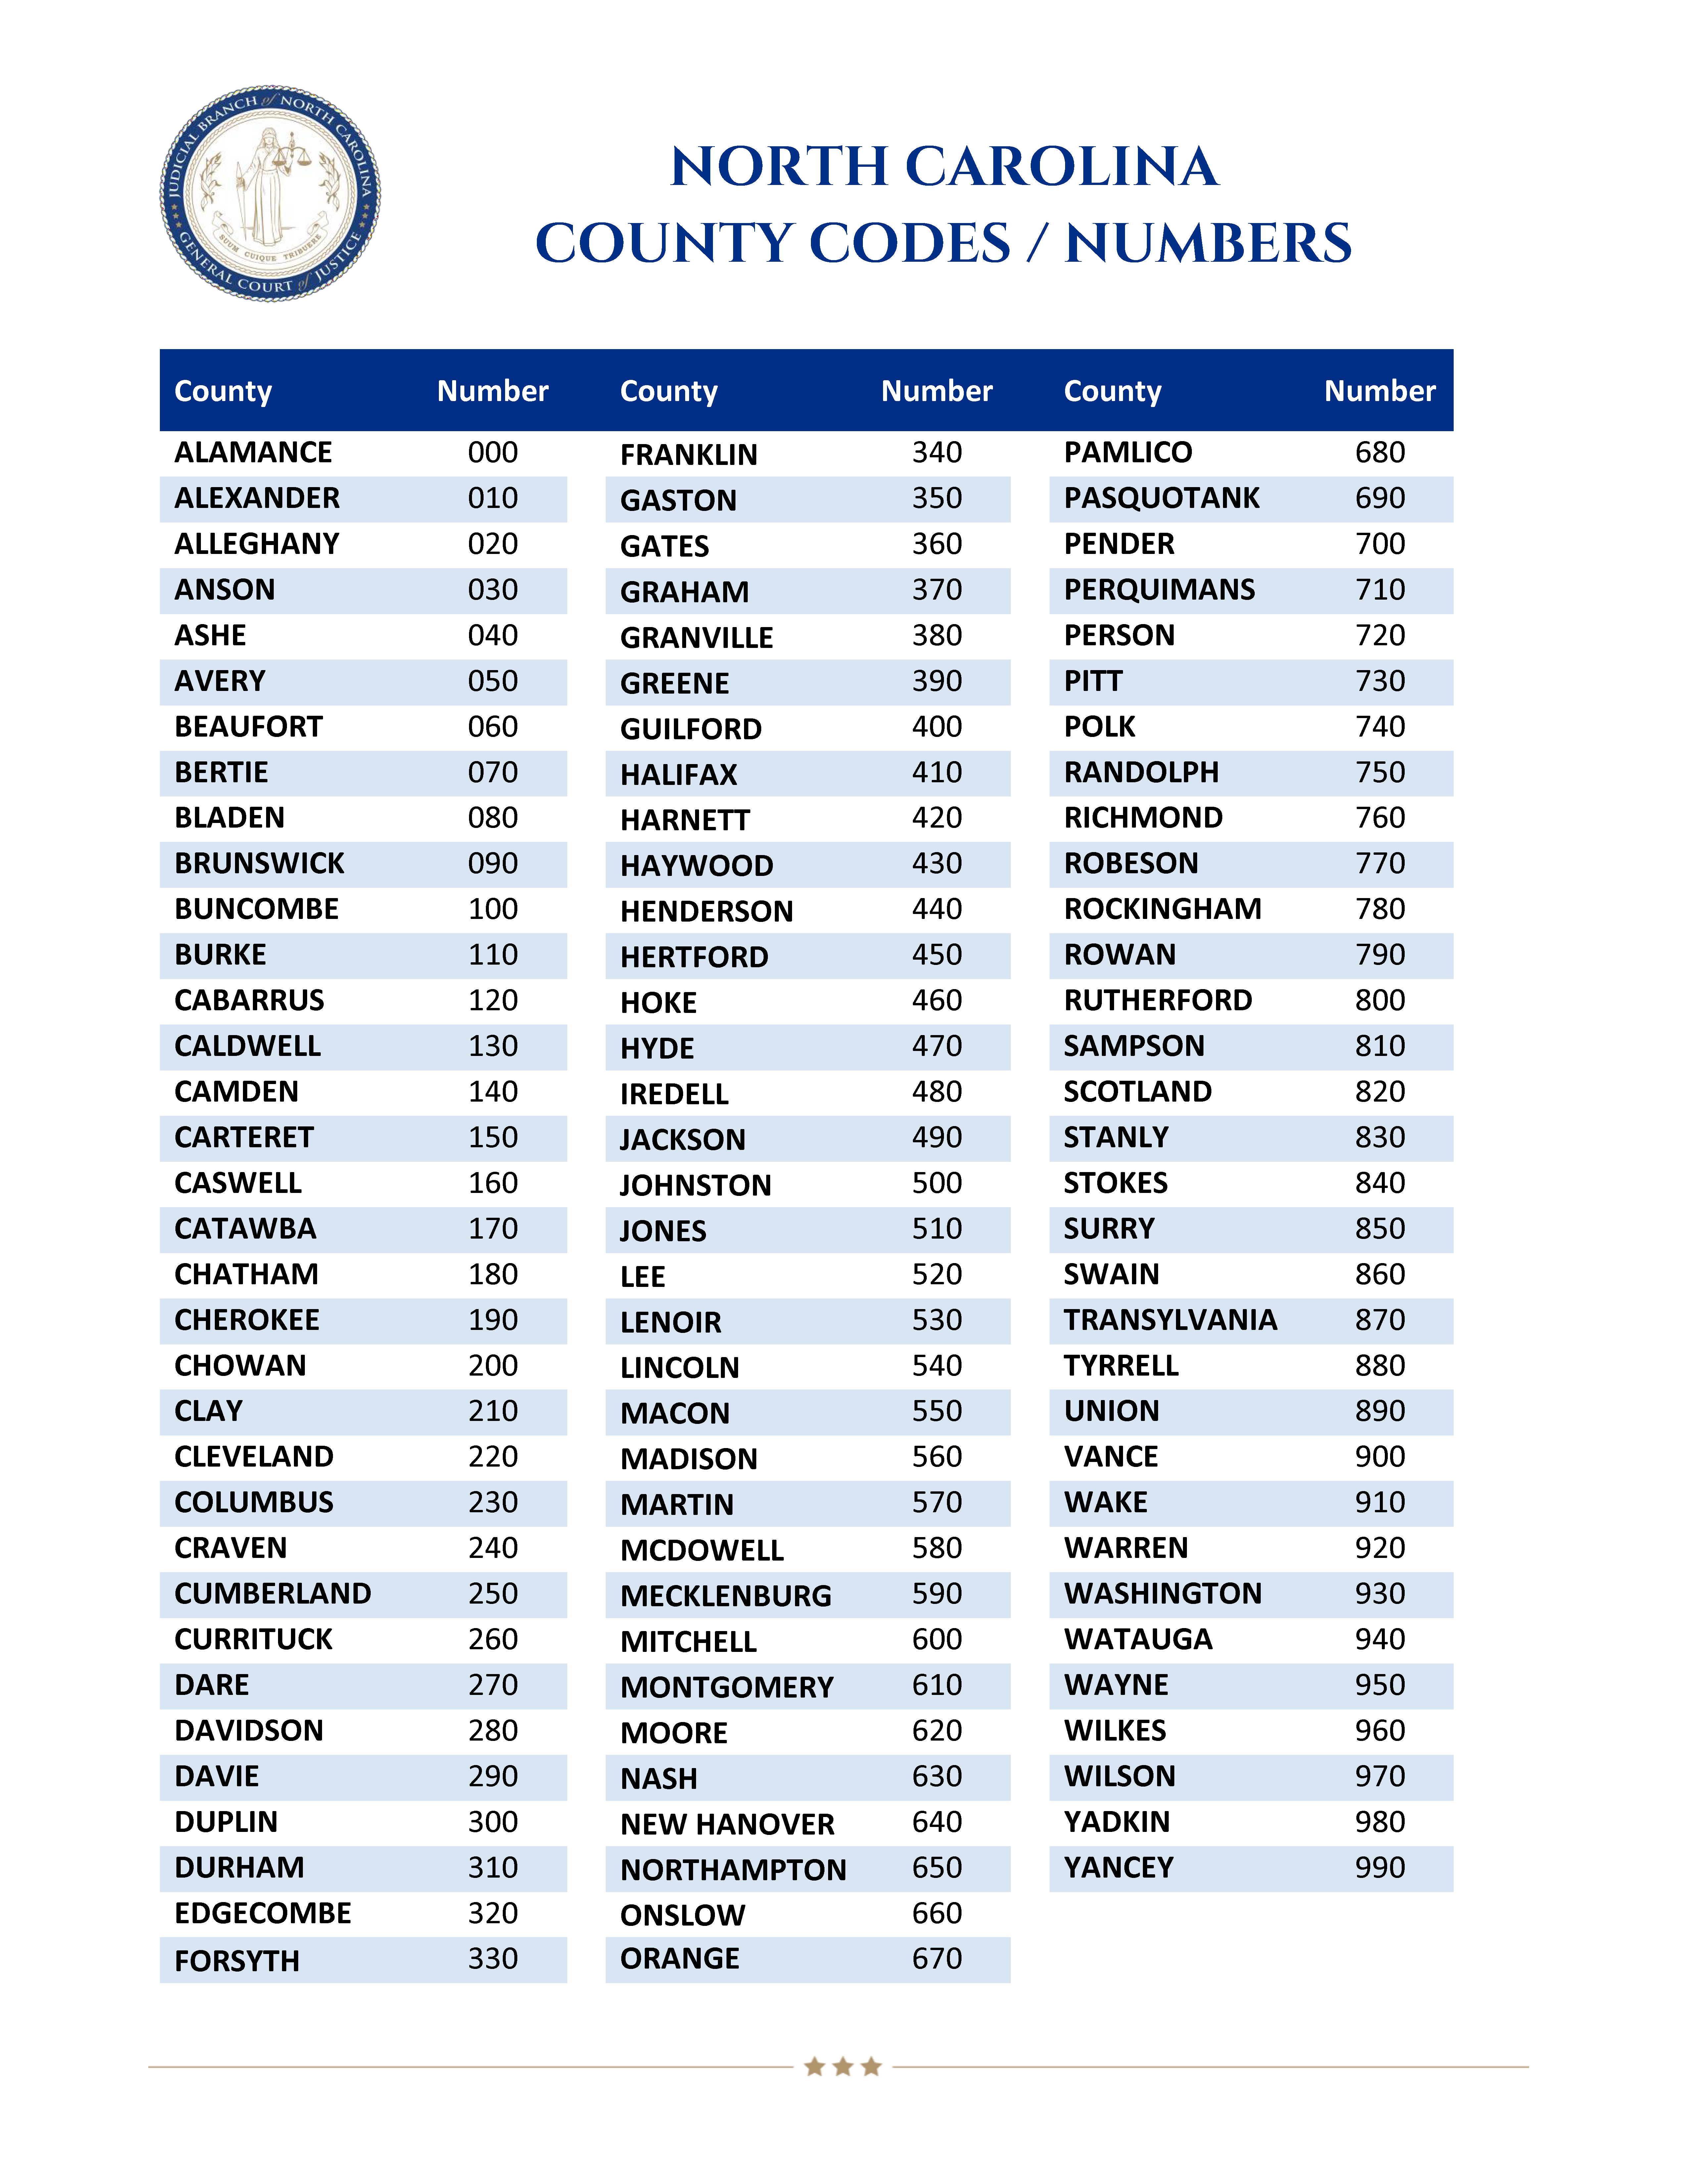 County Codes / Numbers